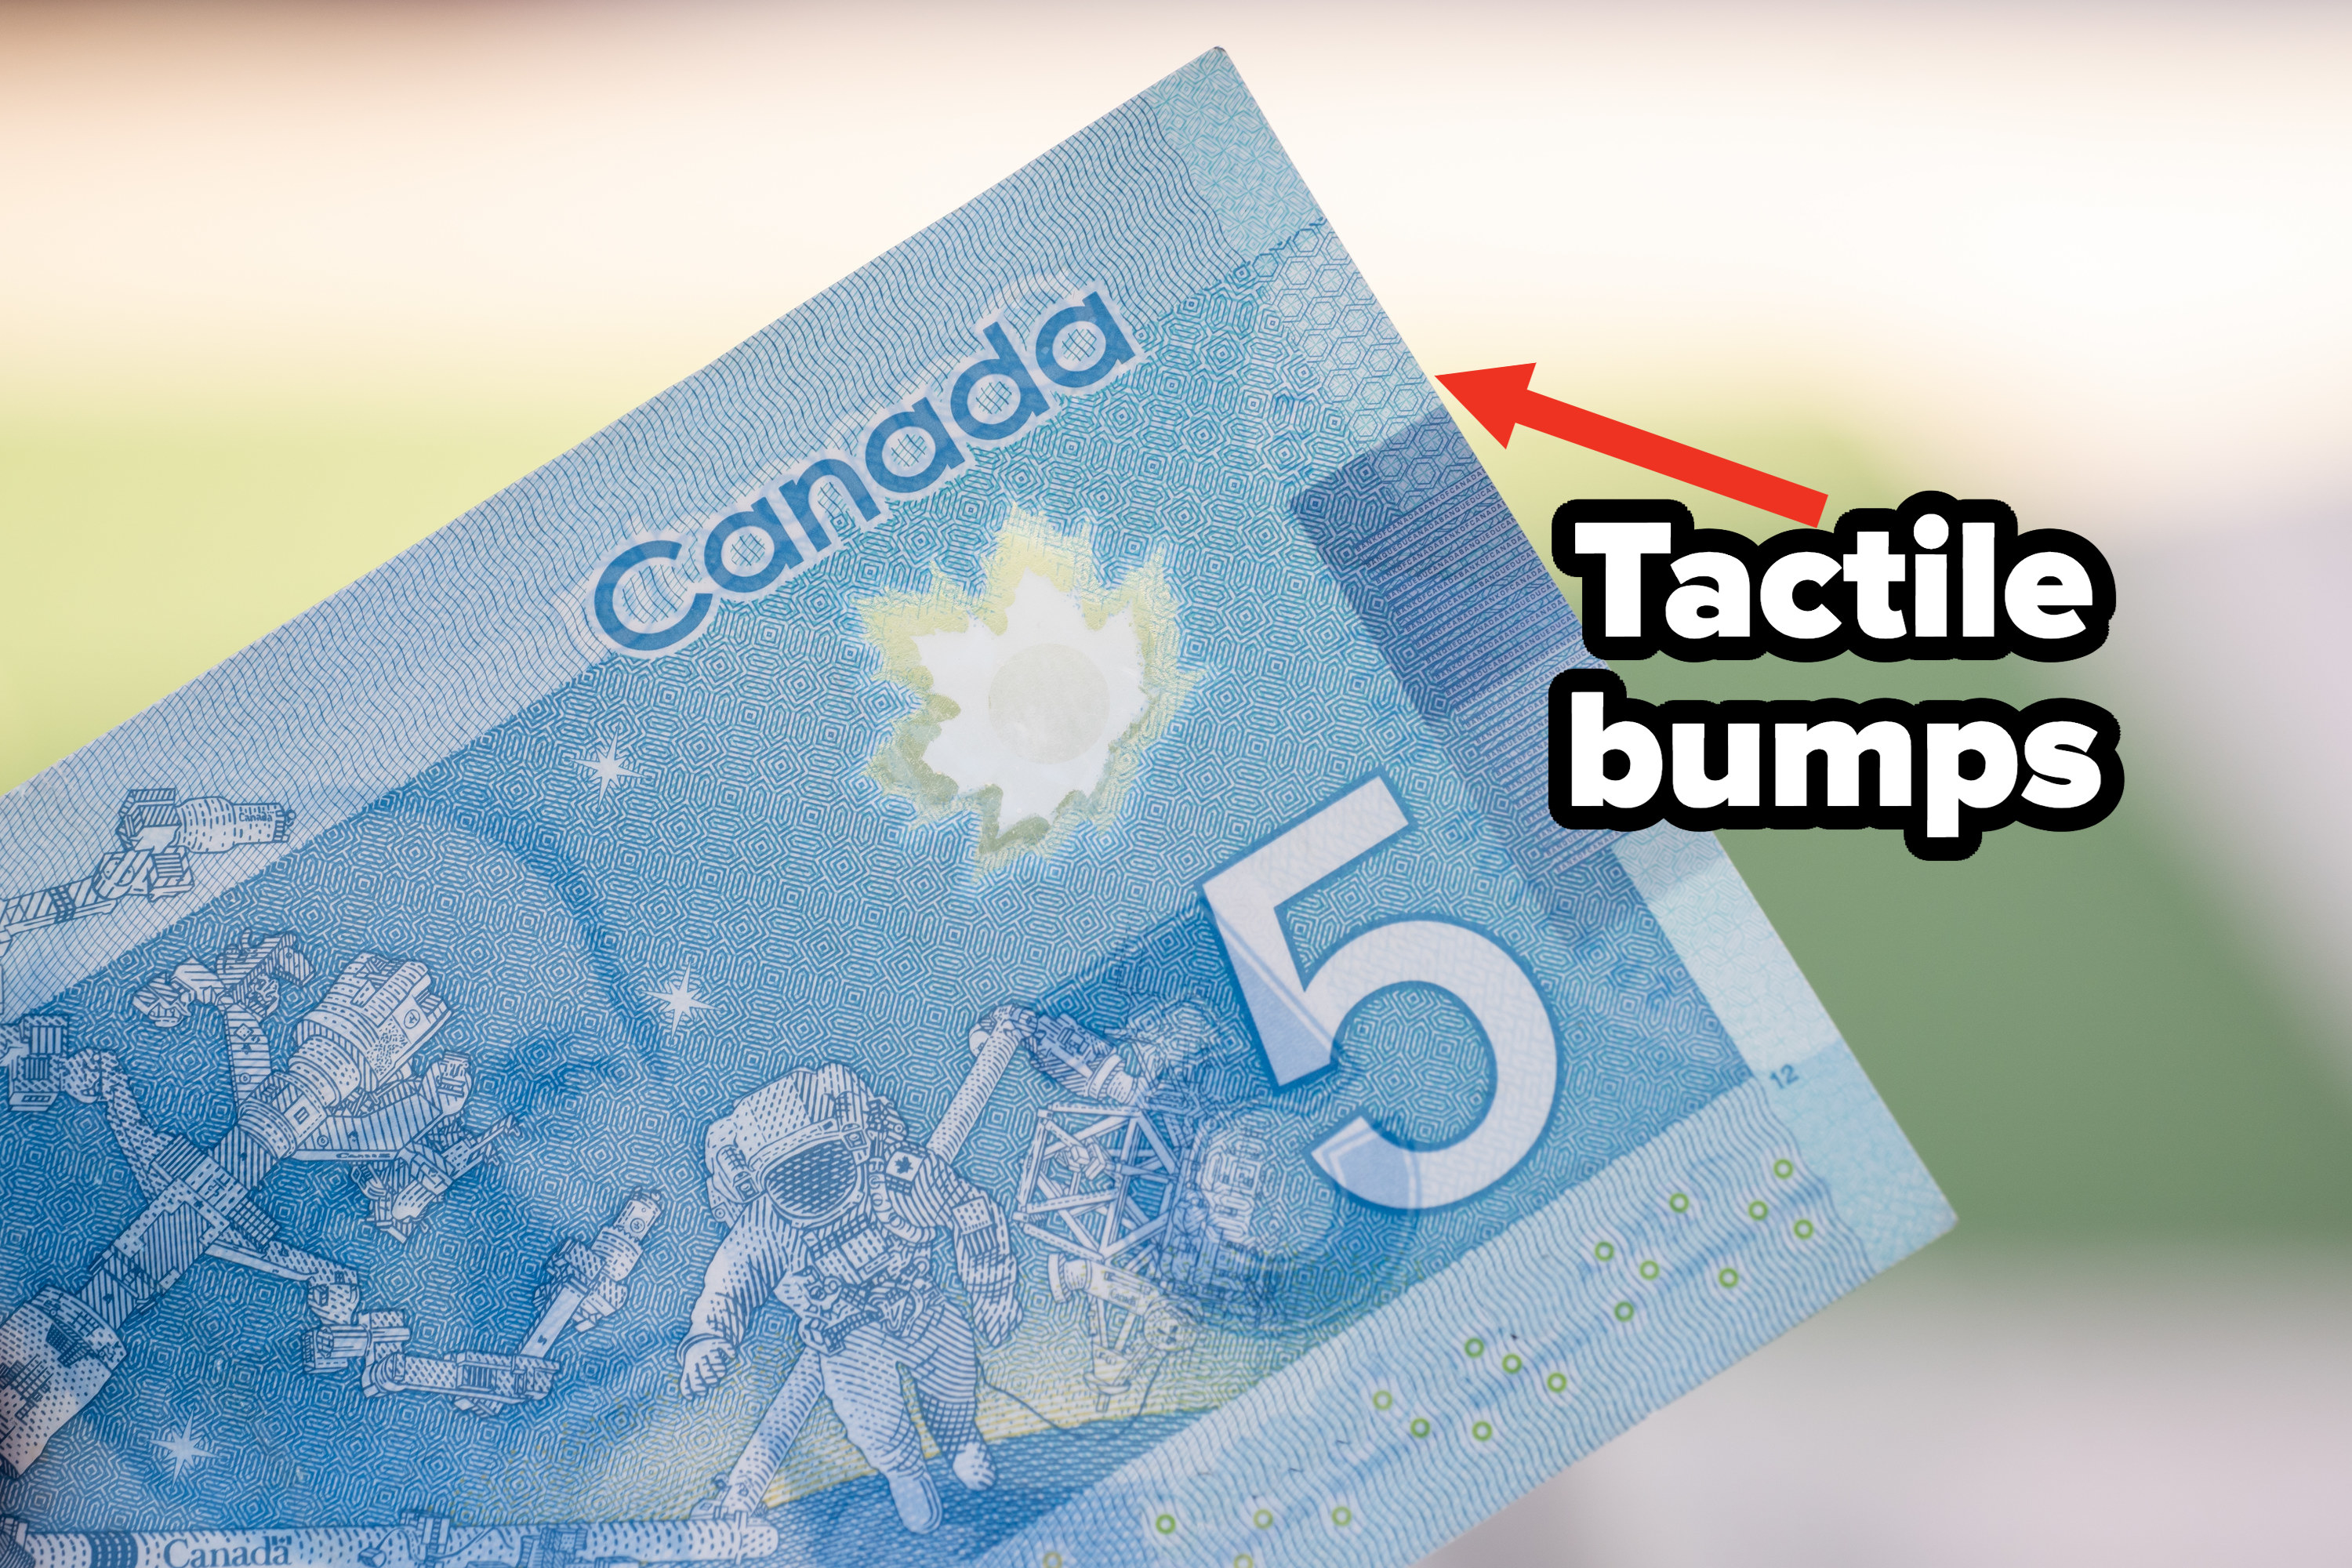 Canadian 5 dollar bill with tactile bumps in the top righthand corner